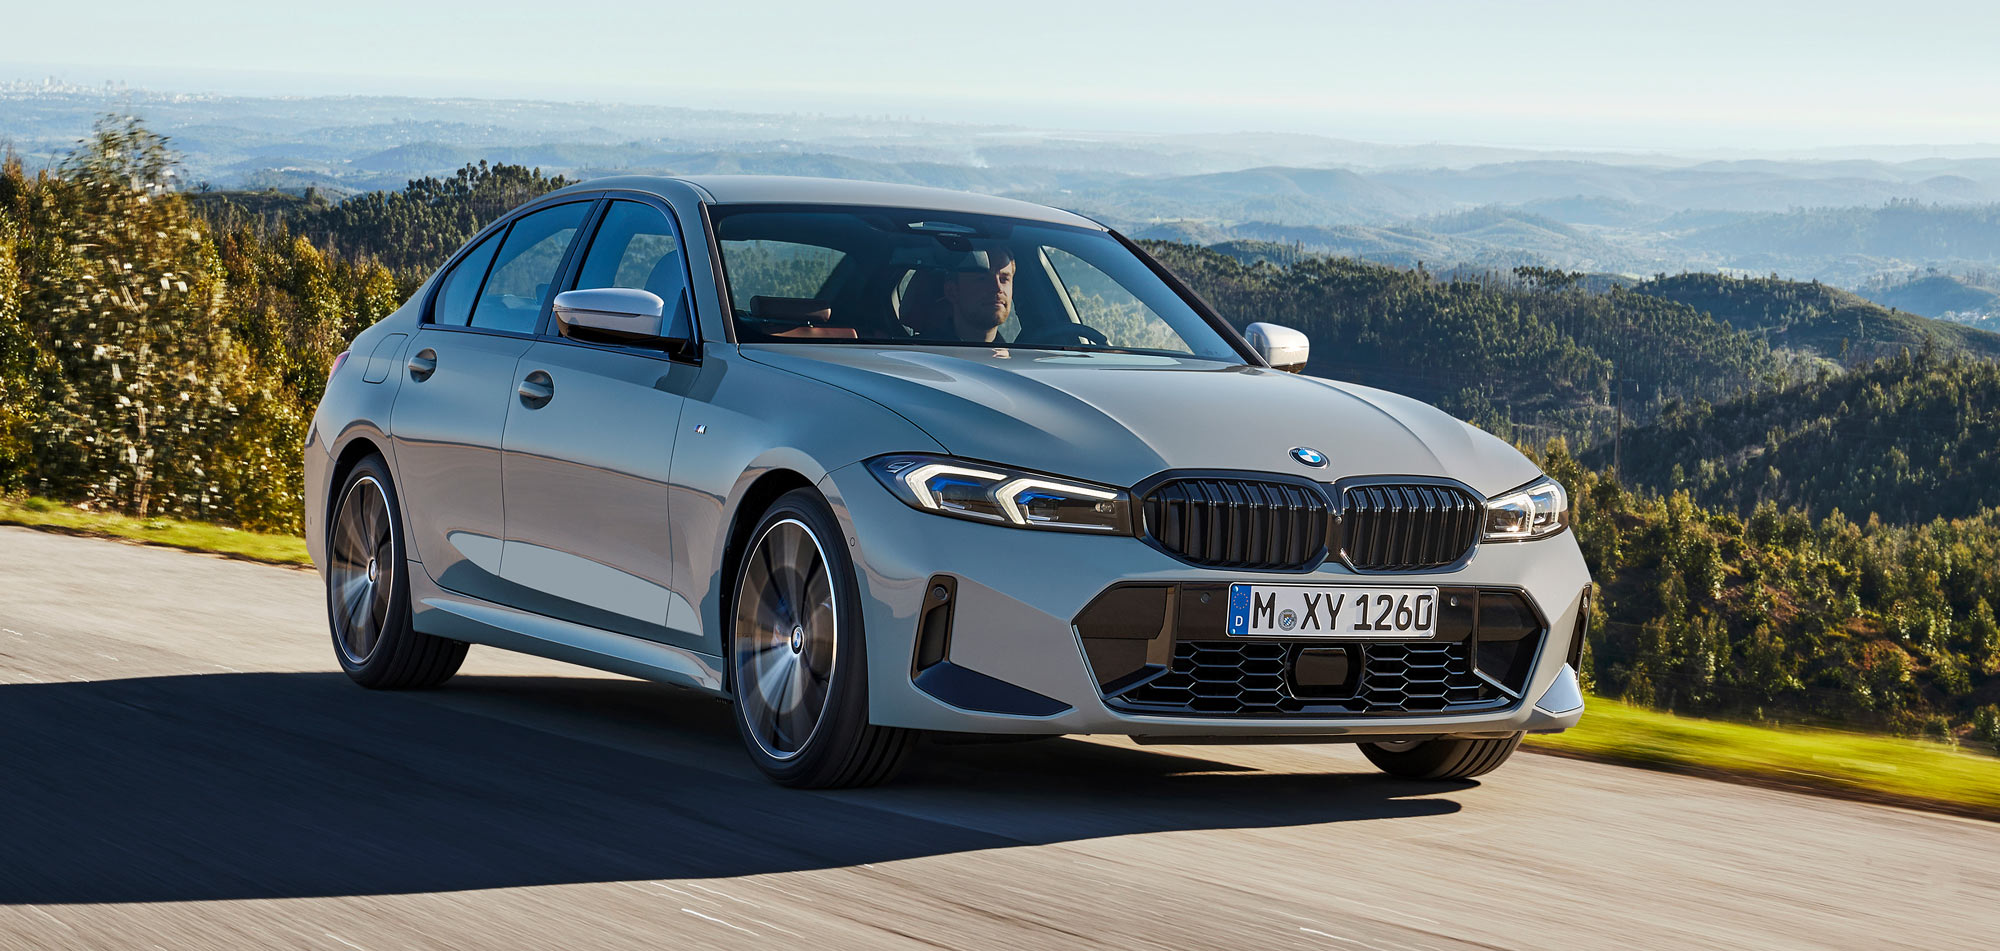 Seventh-Generation BMW 5 Series Updated For 2021 - BimmerLife